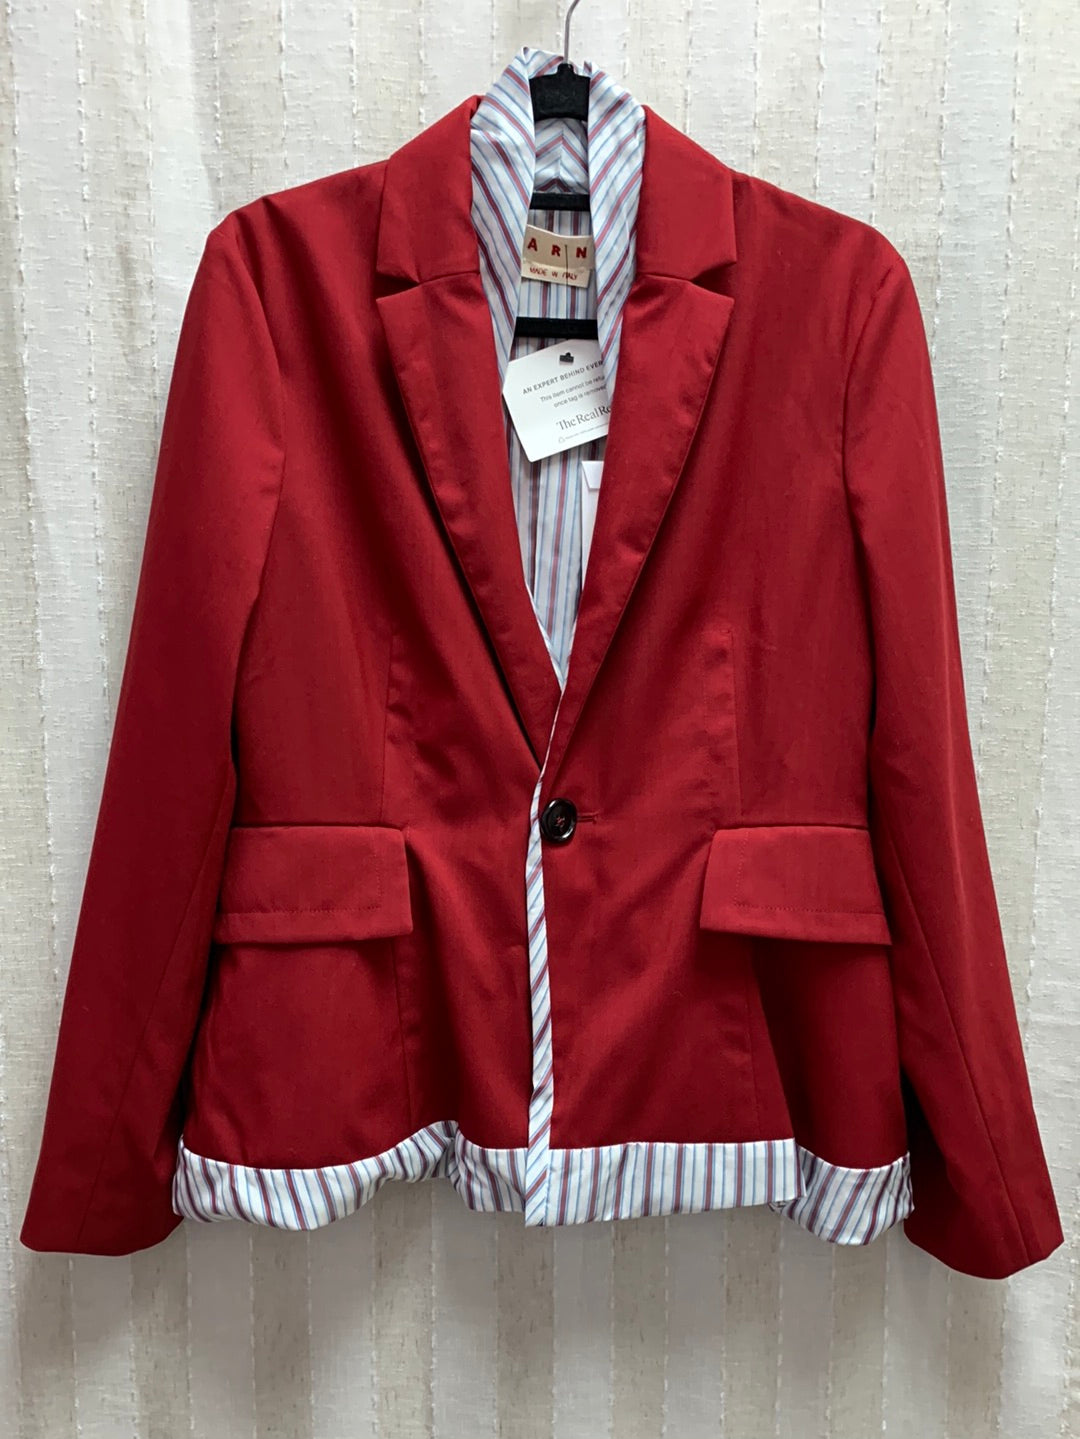 NWT - MARNI china red stripe lined Tropical Wool Jacket - 44